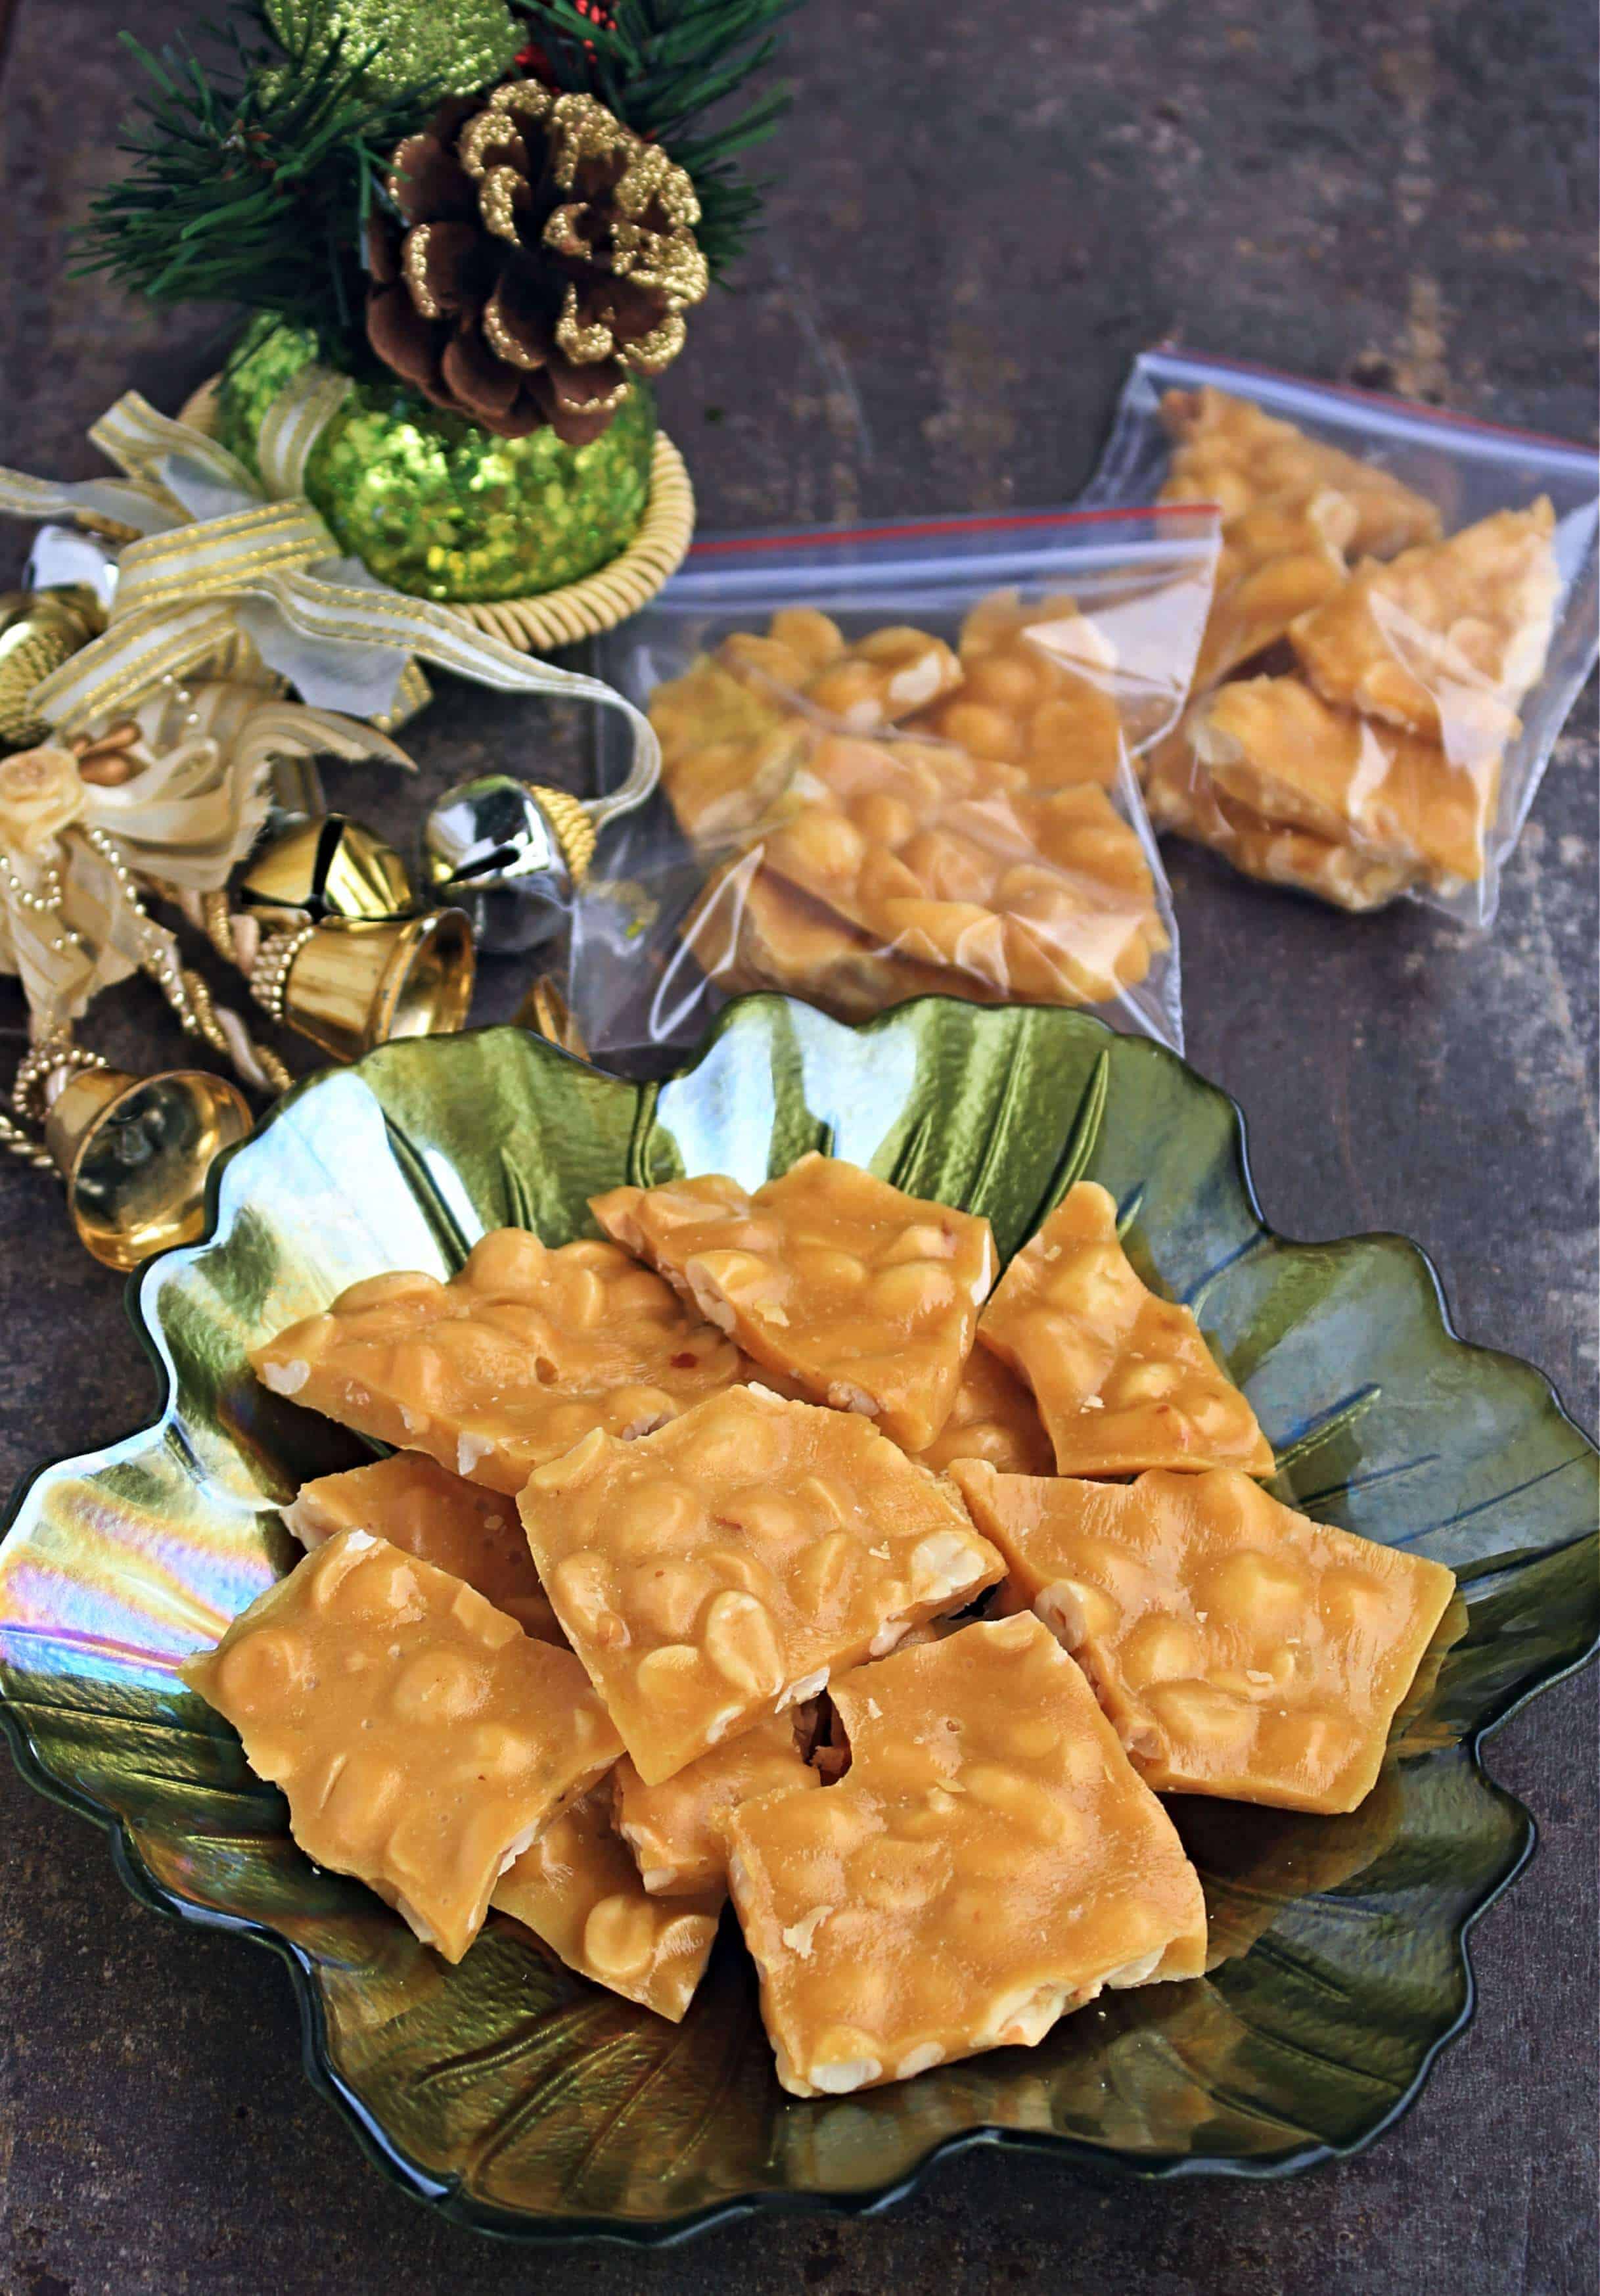 Old Fashioned Peanut Brittle pieces in a green plate